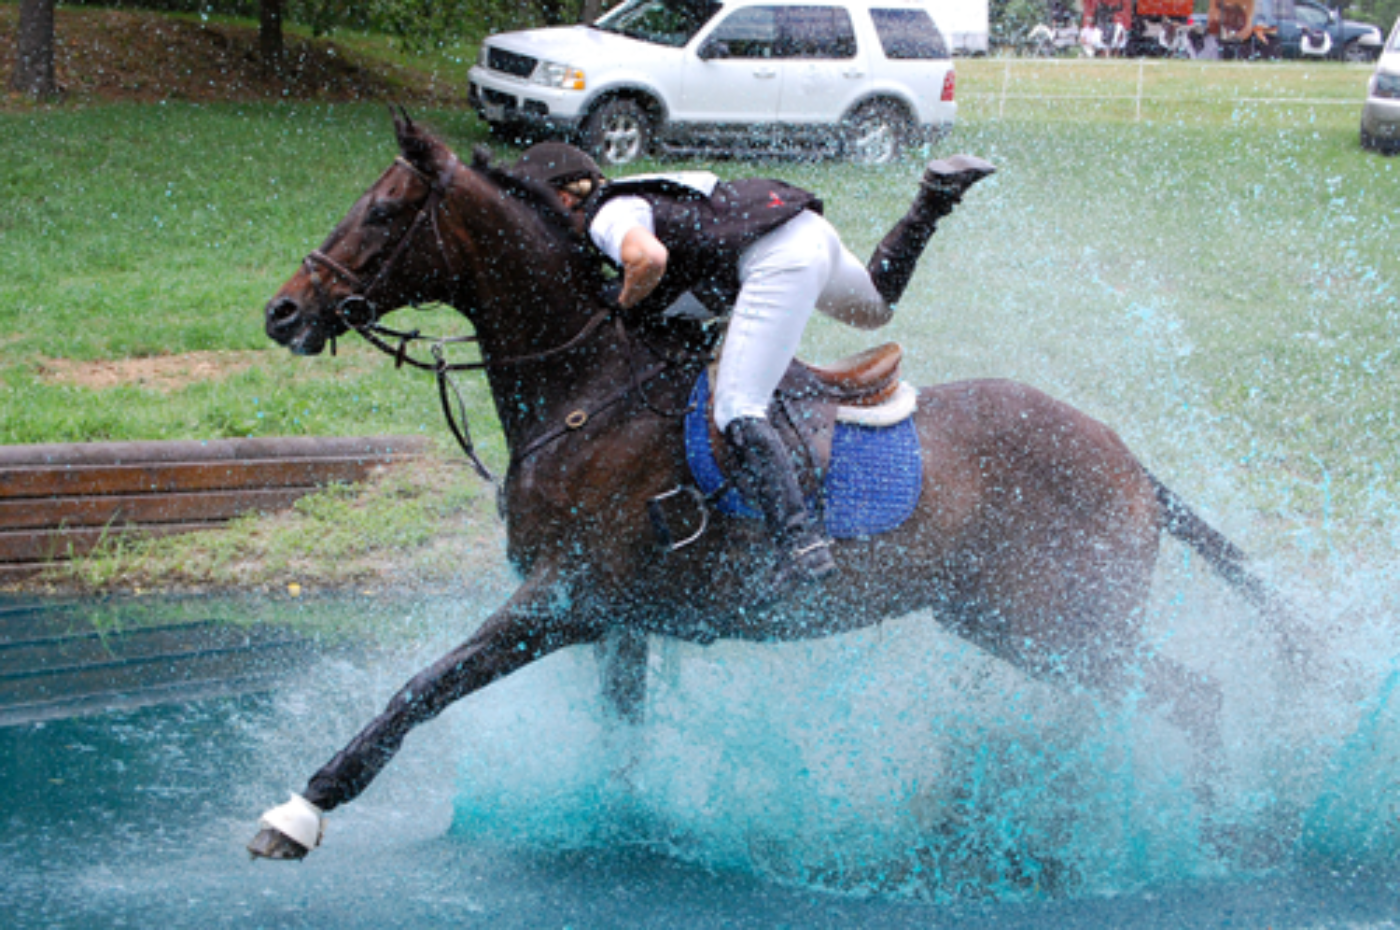 Claire Kelley and Orion XII made an impressive save in the water to finish the Intermediate in 17th place.